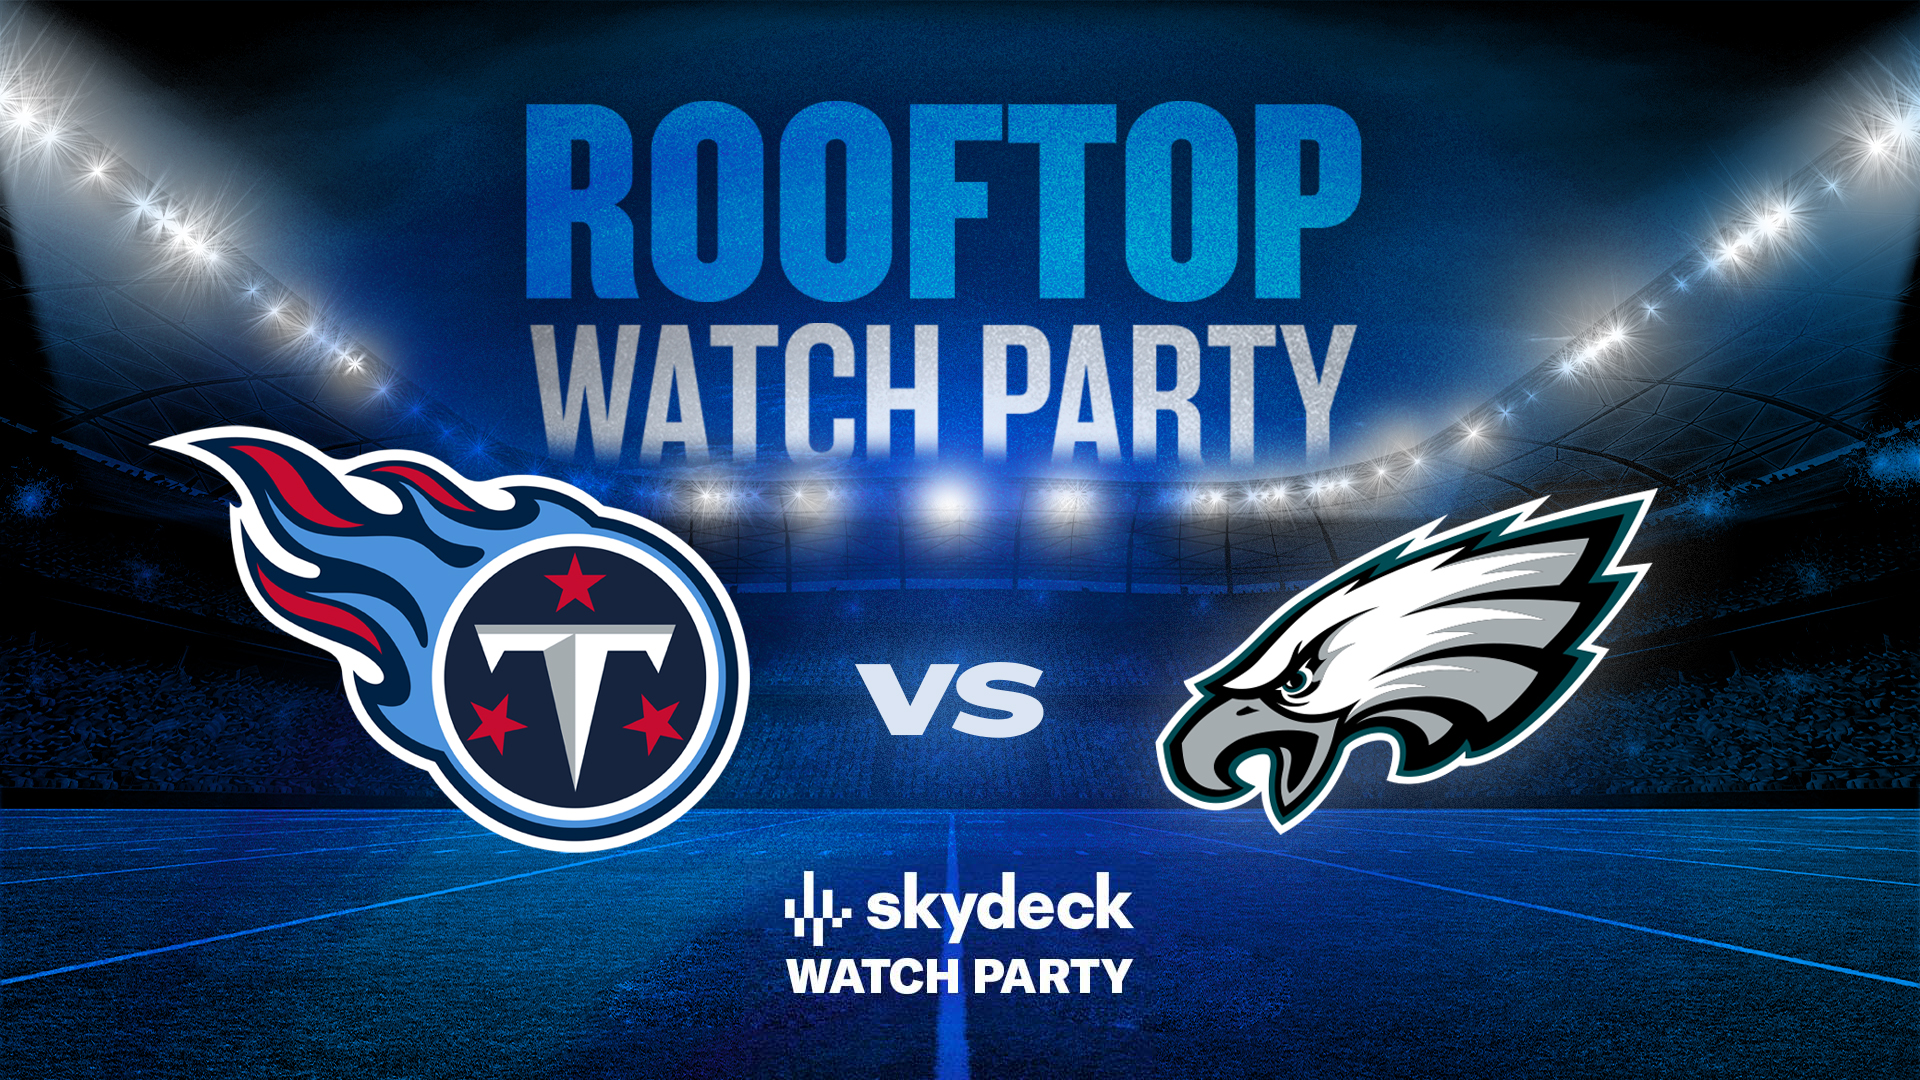 Promo image of Titans vs. Eagles | Skydeck Watch Party